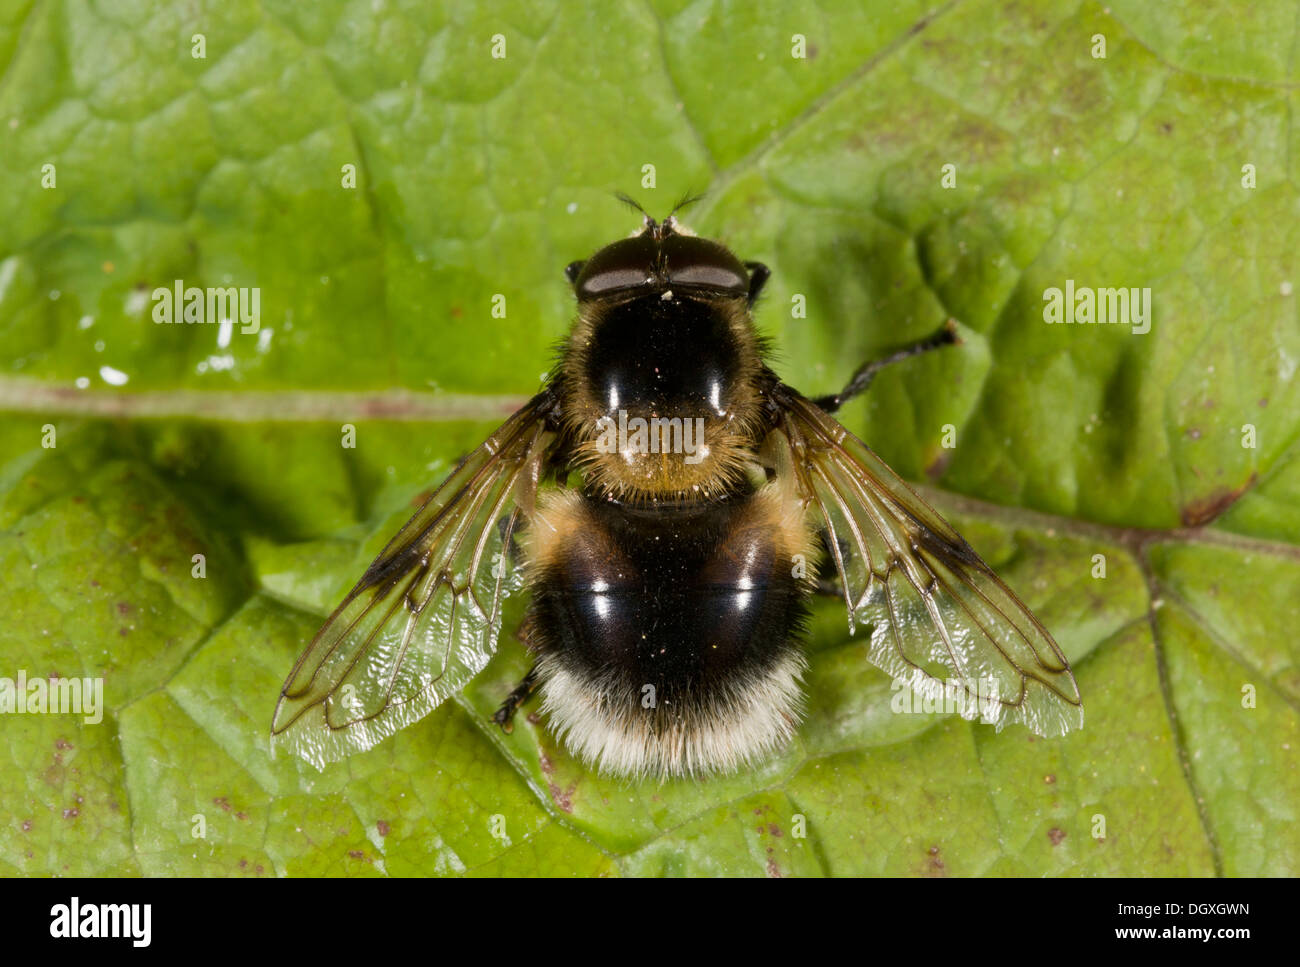 A bumble-bee mimic hoverfly, Pocota personata, mimicking a white-tailed bumble bee. Uncommon in UK. Stock Photo